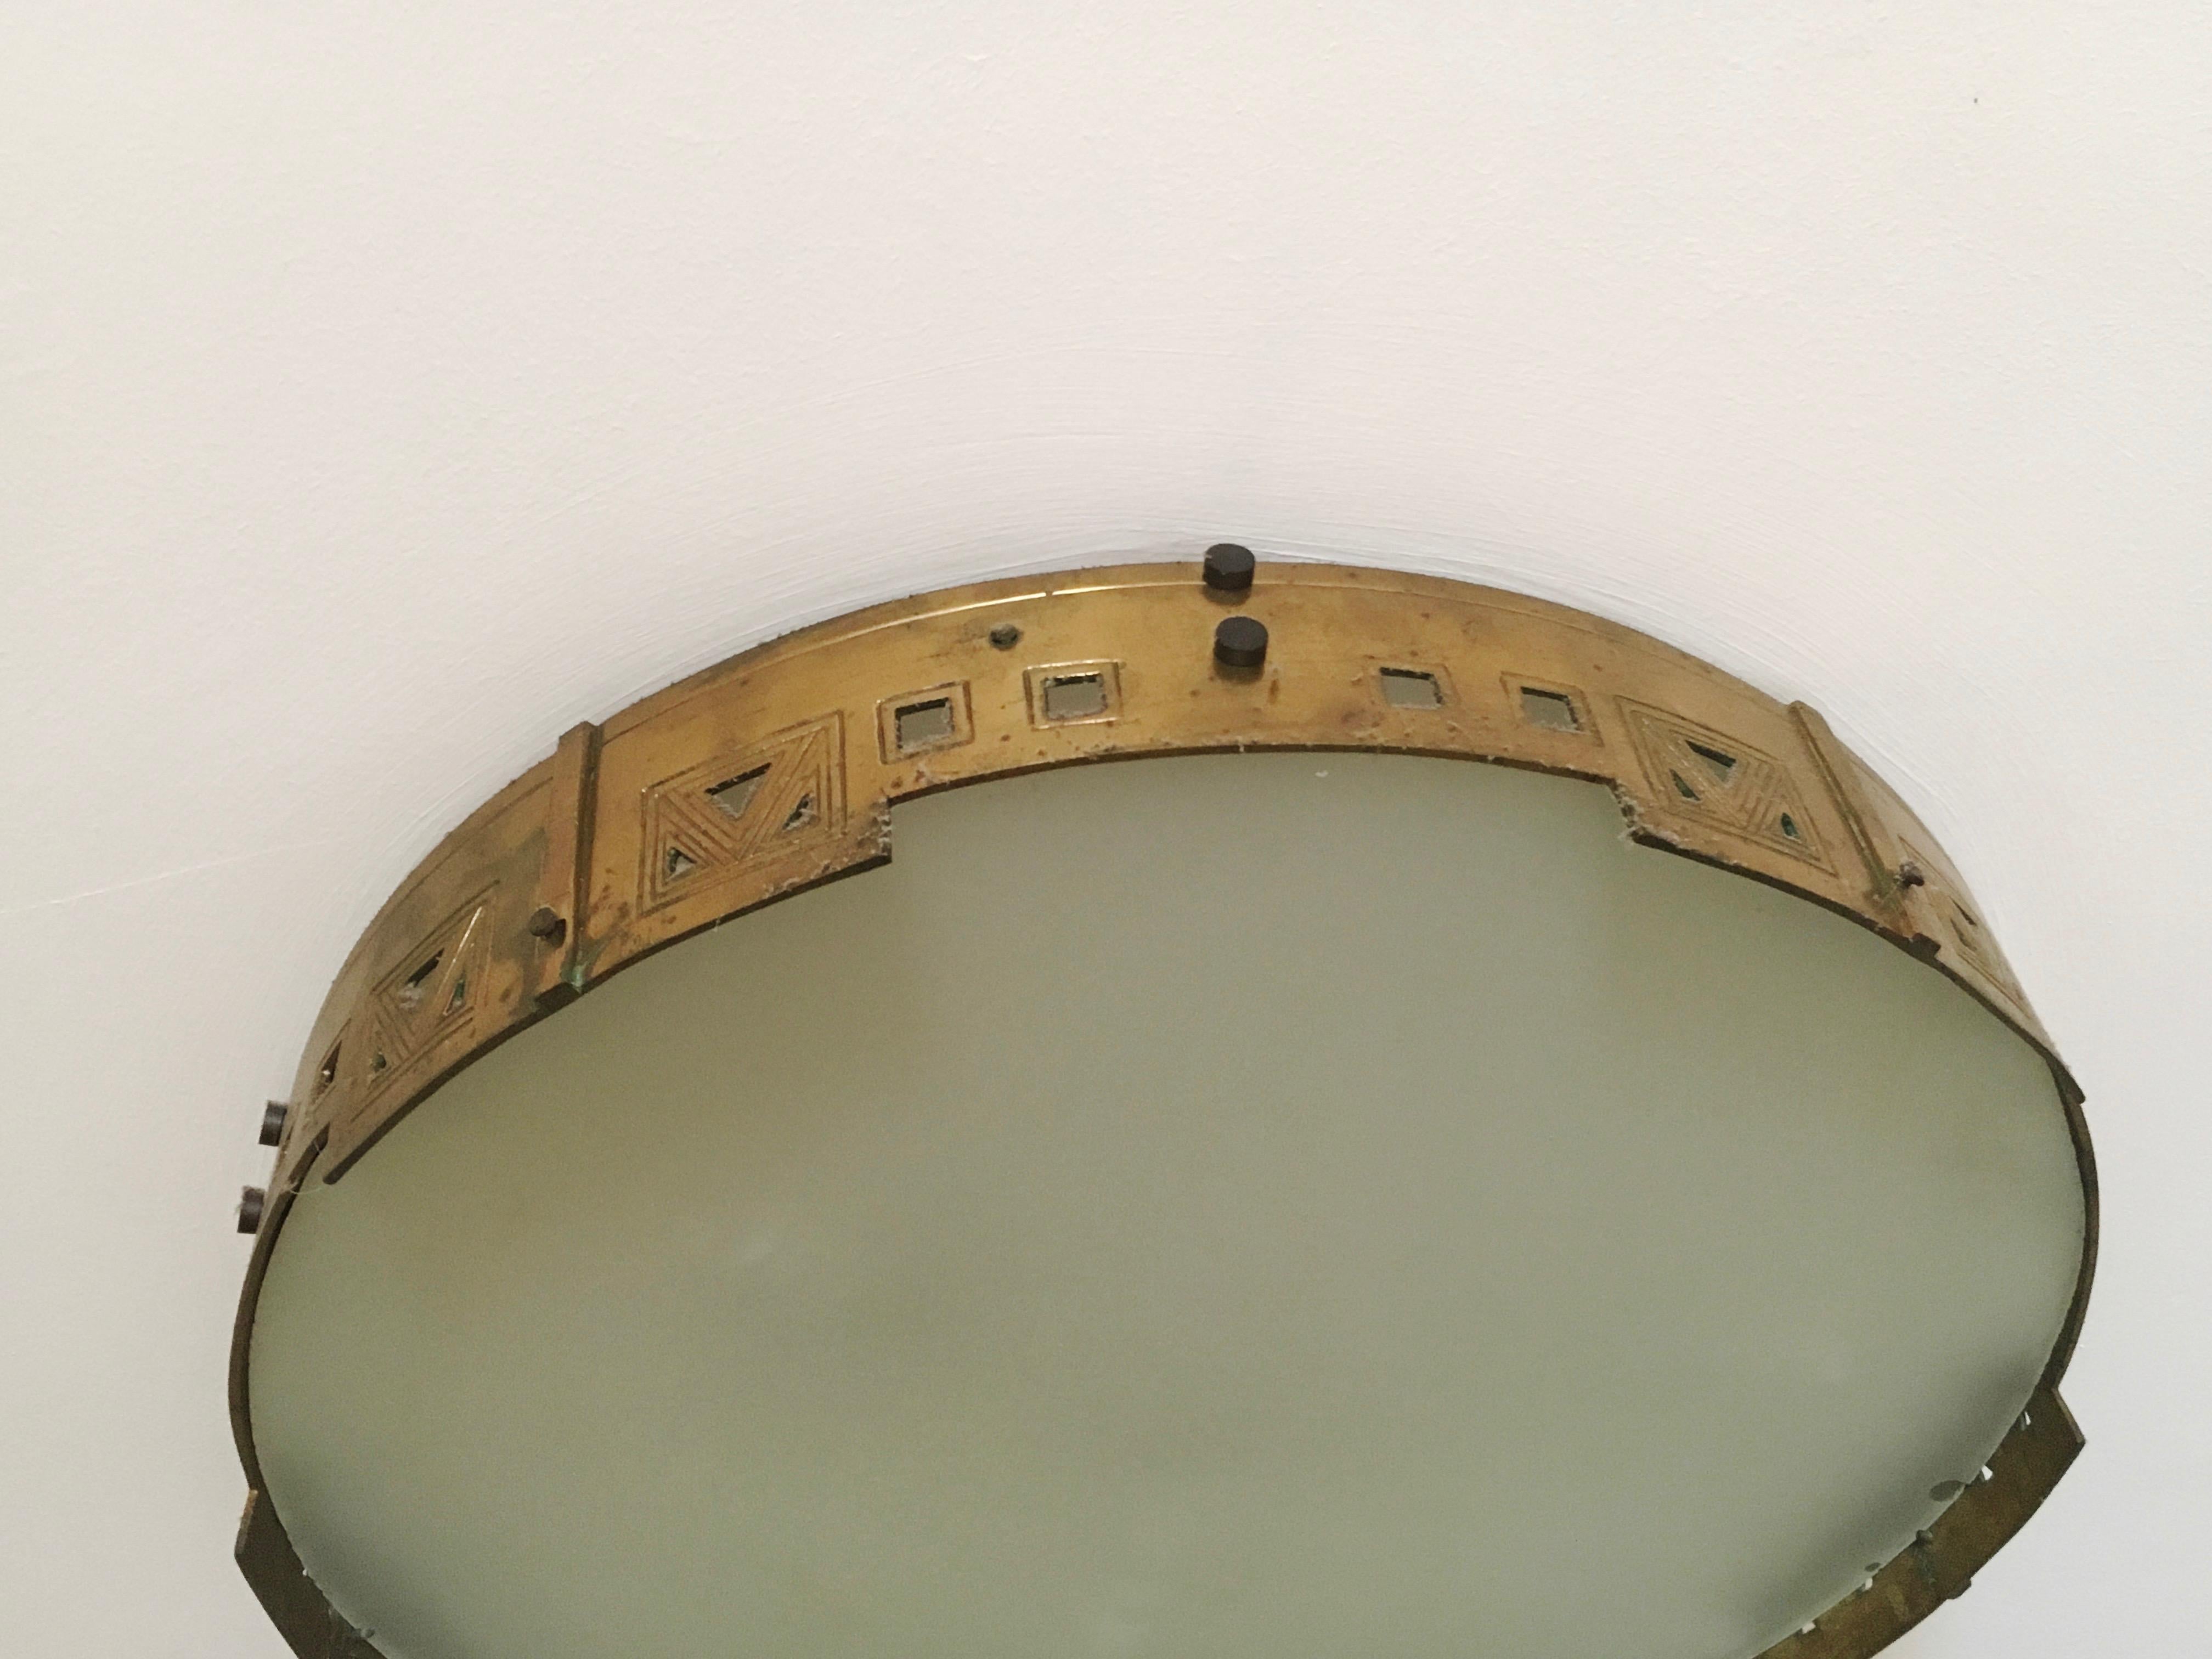 Unique large Spanish Art Deco brass flush mount ceiling lamp, 1920s. Beautiful combination of the 3 basic shapes, triangle, square and circle. Simple and classic Art Deco combination.
The beauty of the simple shapes.